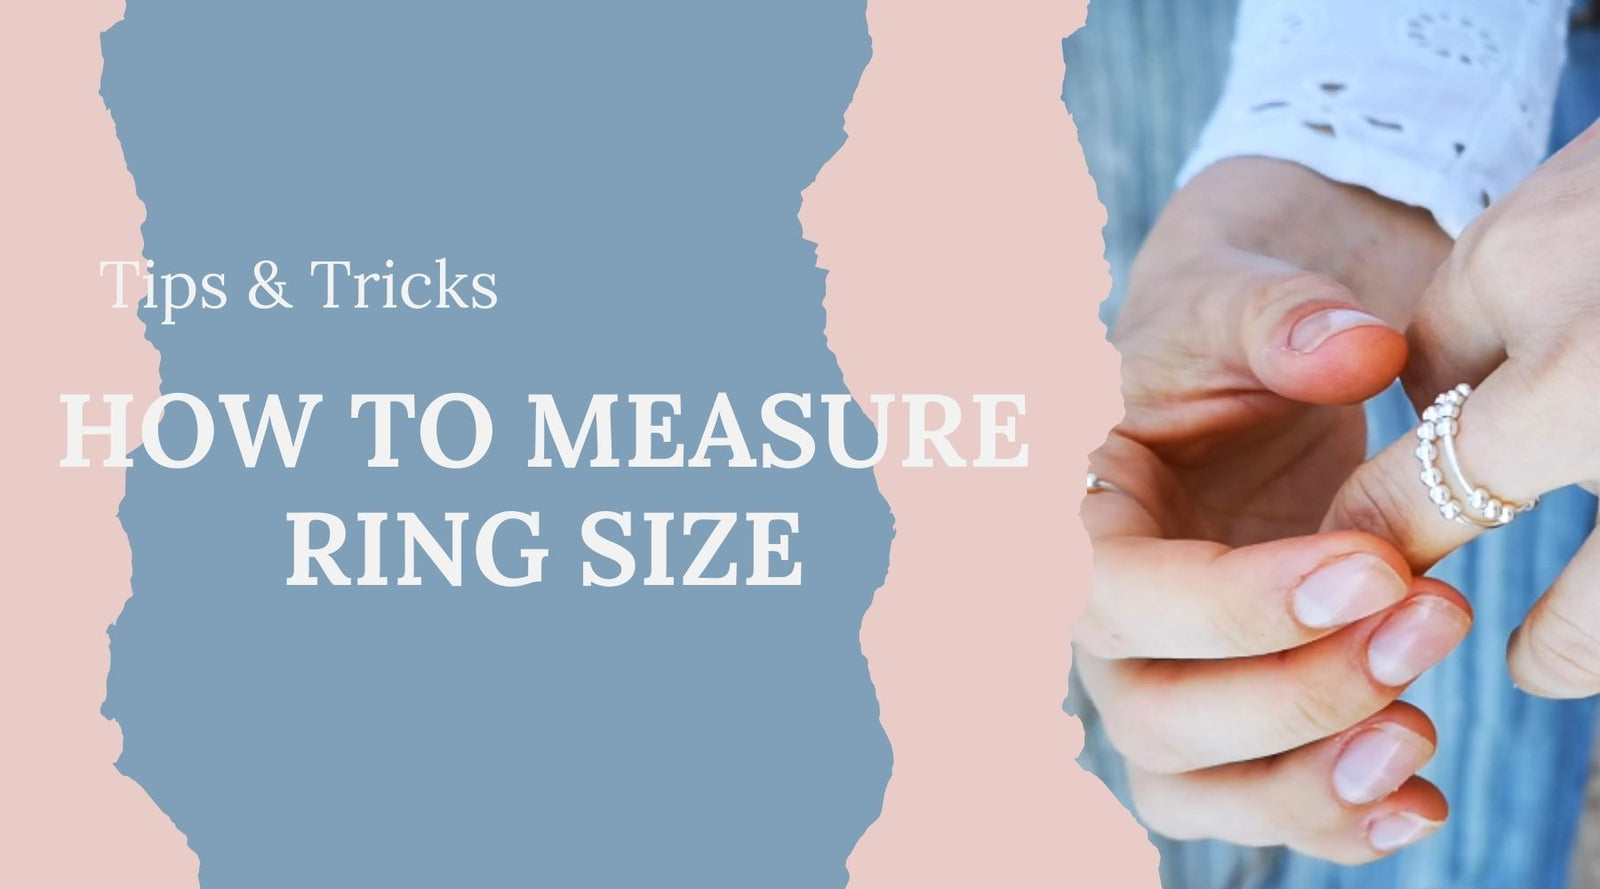 How Do You Measure Your Ring Size?